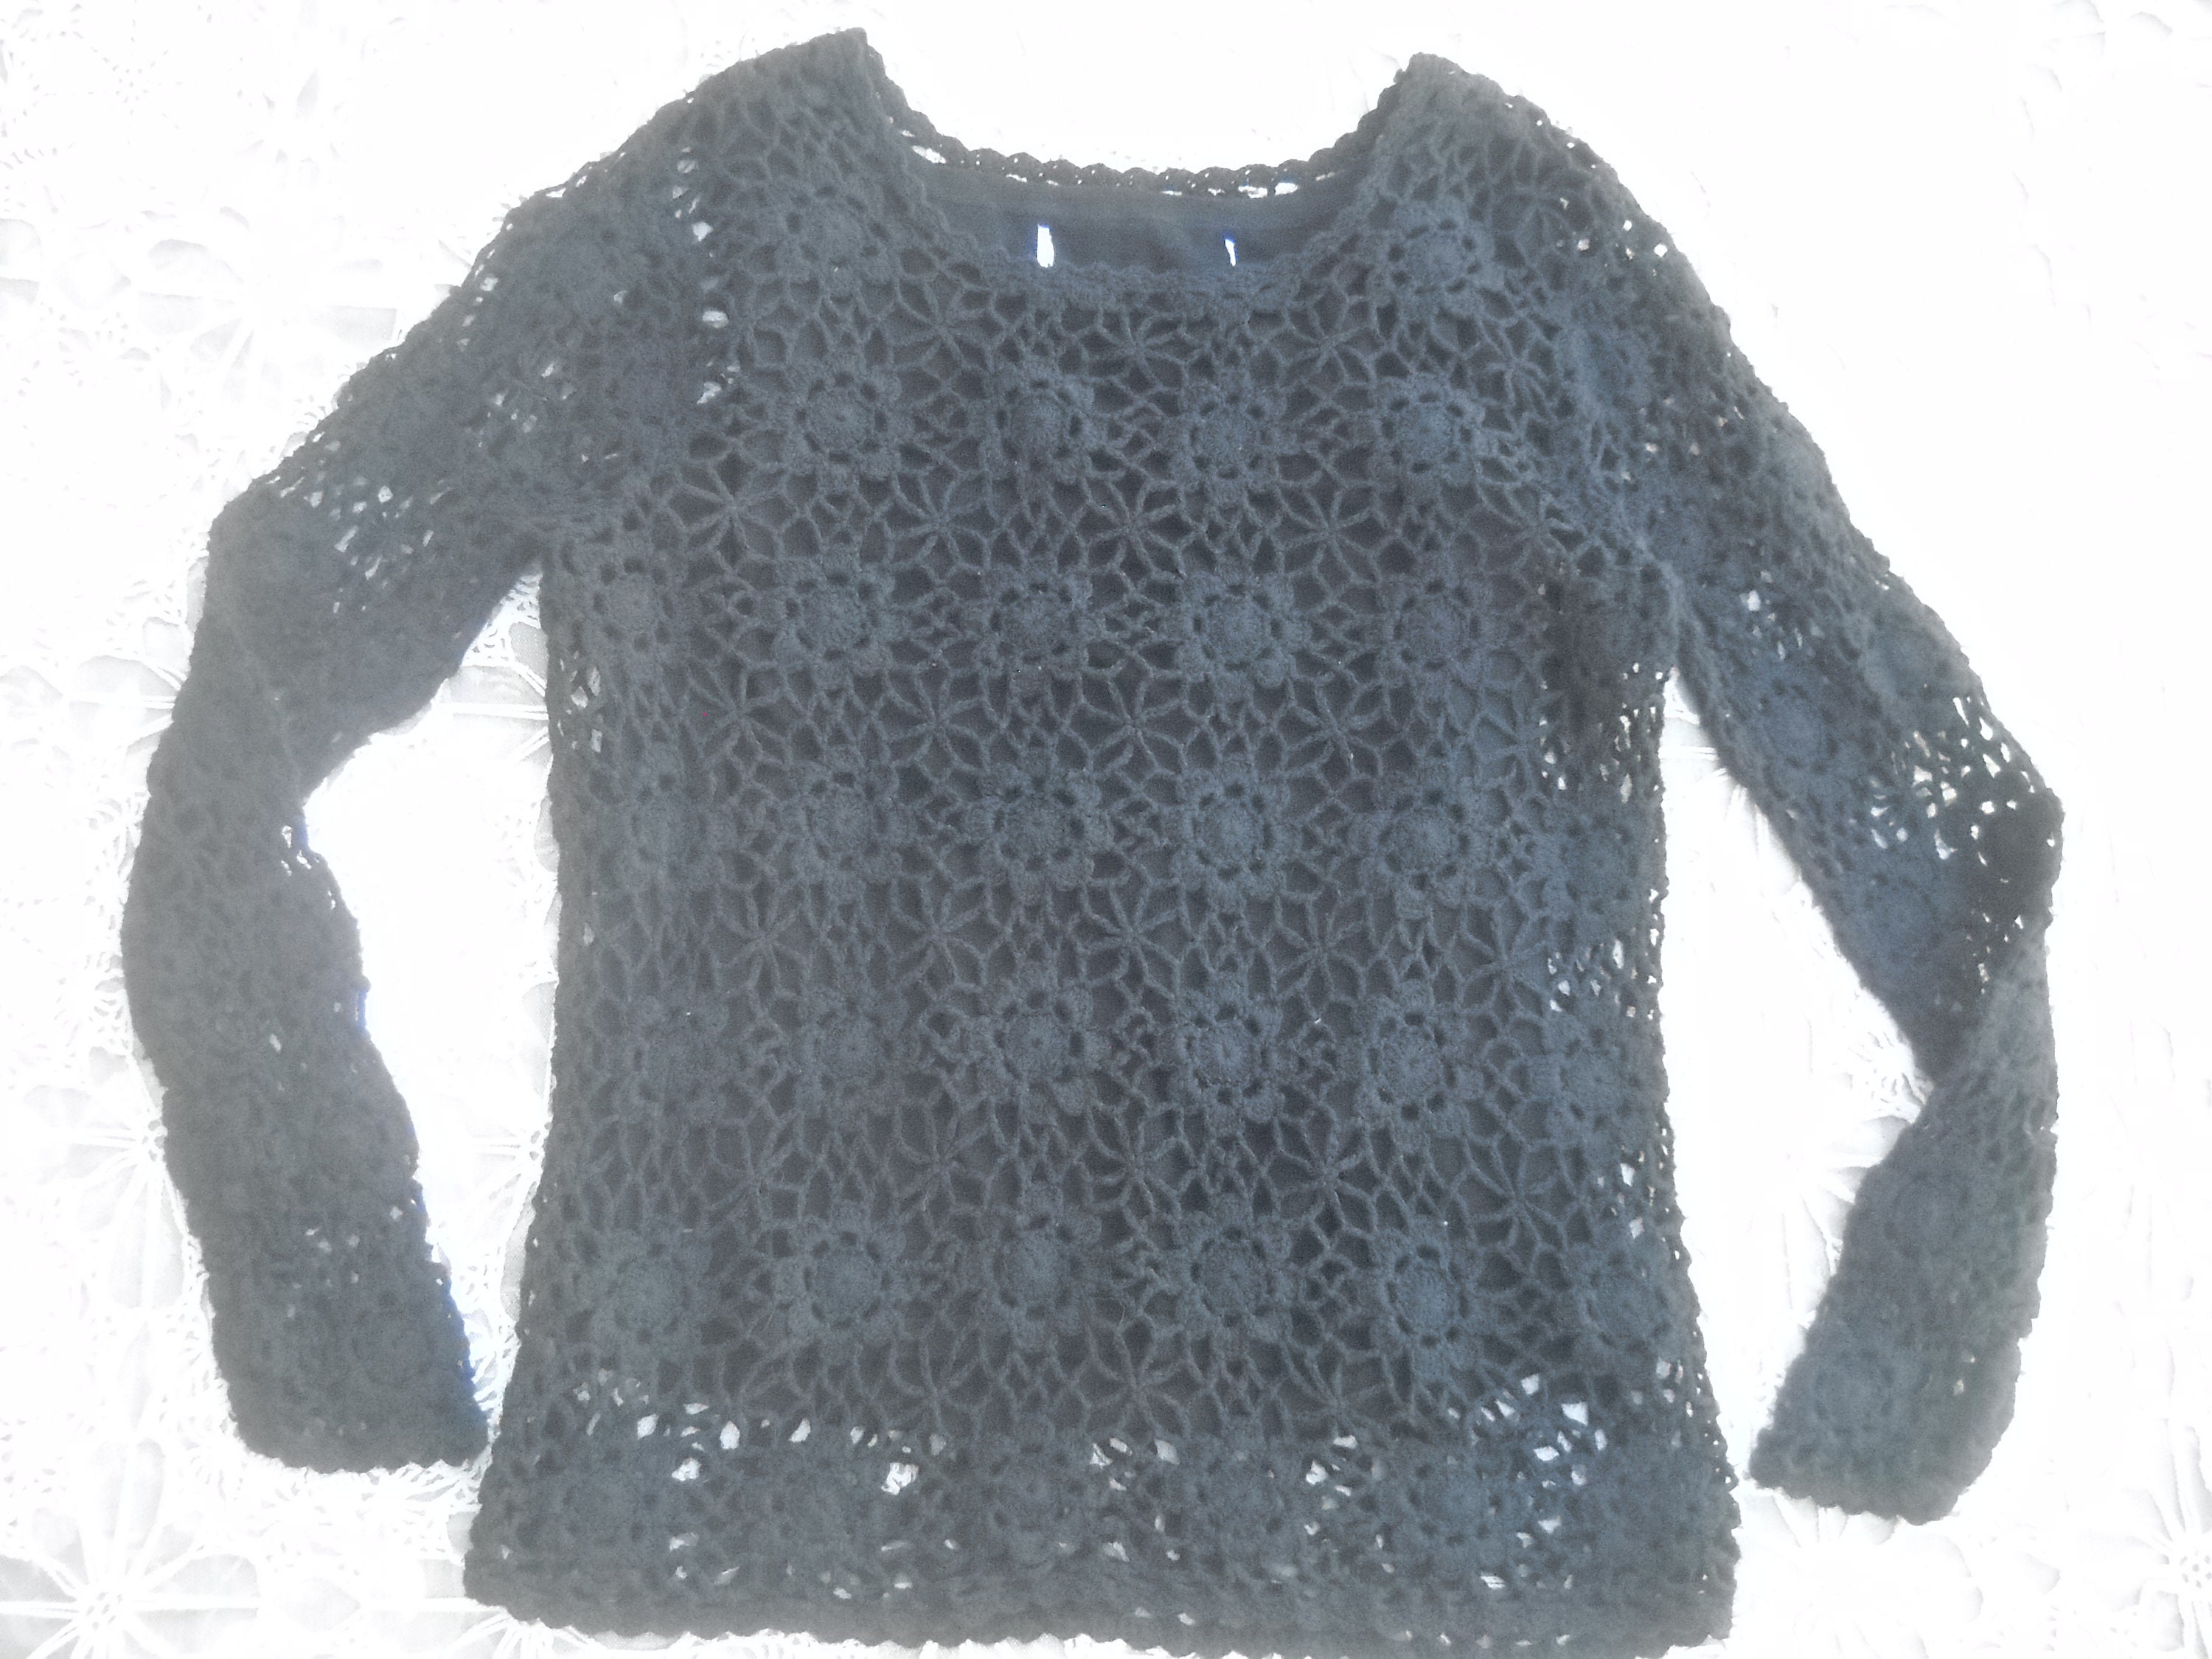 Black Crochet Sweater, Cotton Blend, Size Small, Nicely Lined, Hand Crochet, Features Scalloped Edfing Around Neck, Wrists & Hemline